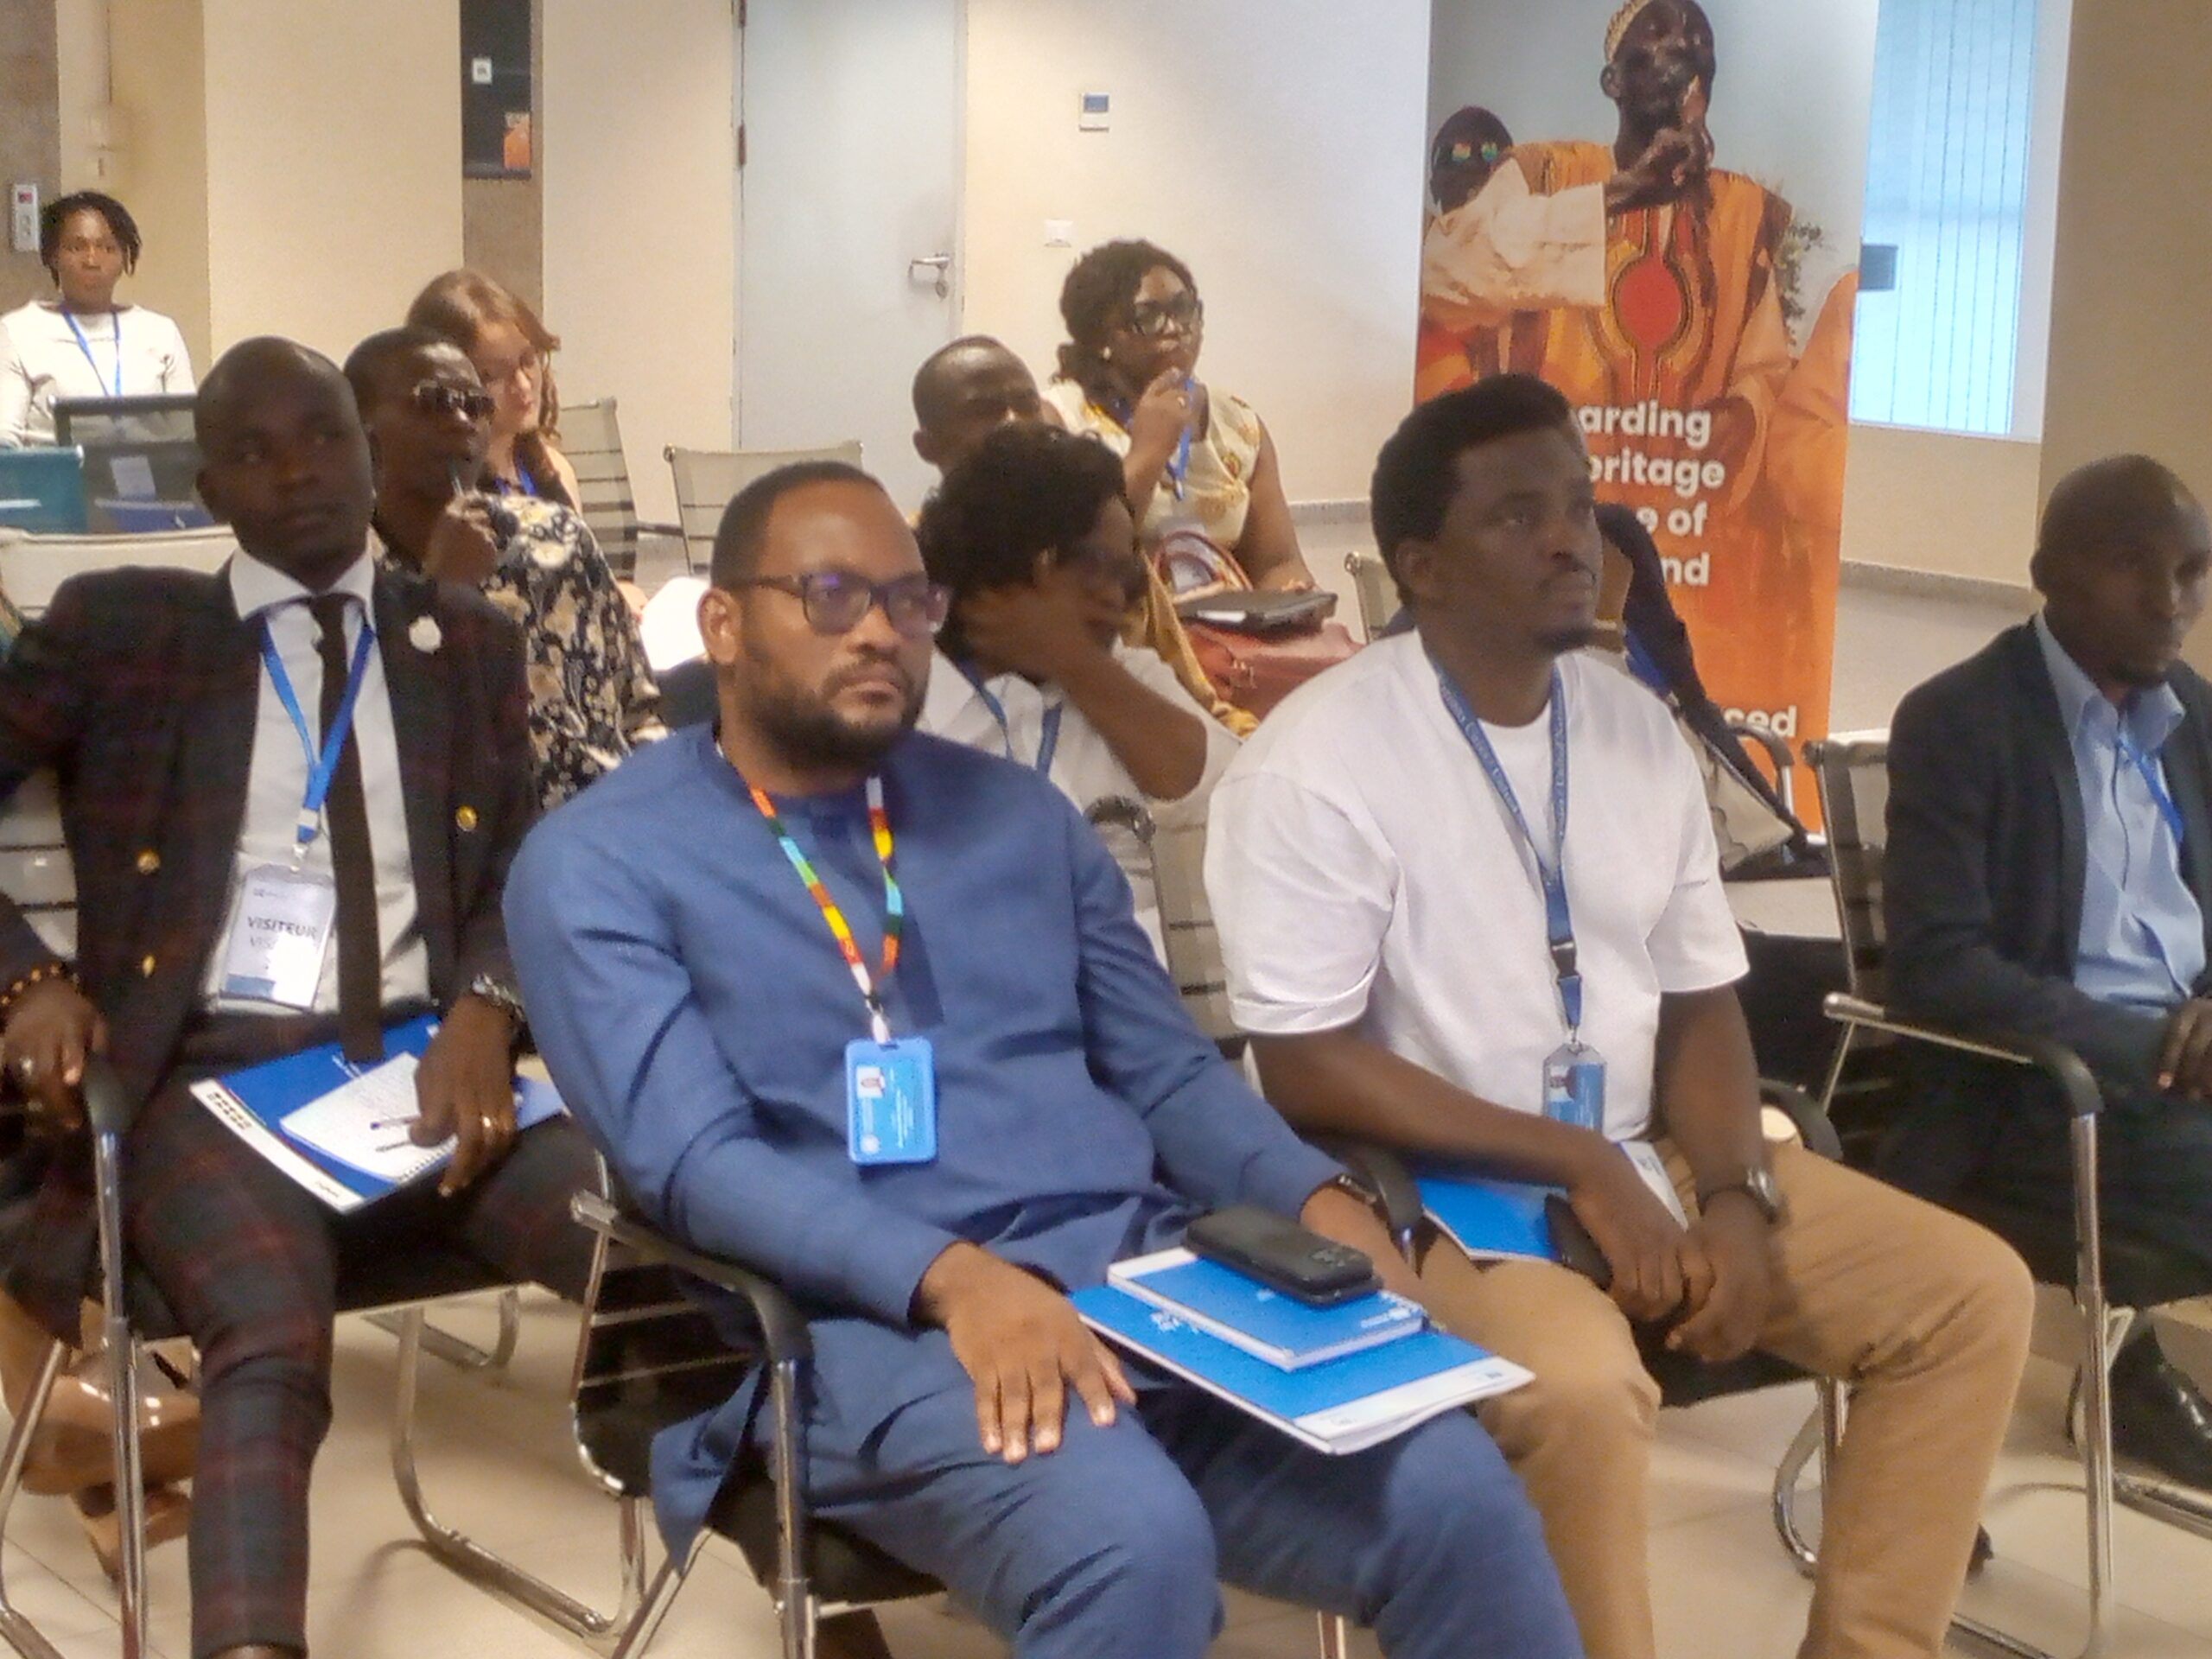 Cross section of UNESCO & MINAC officials at the event